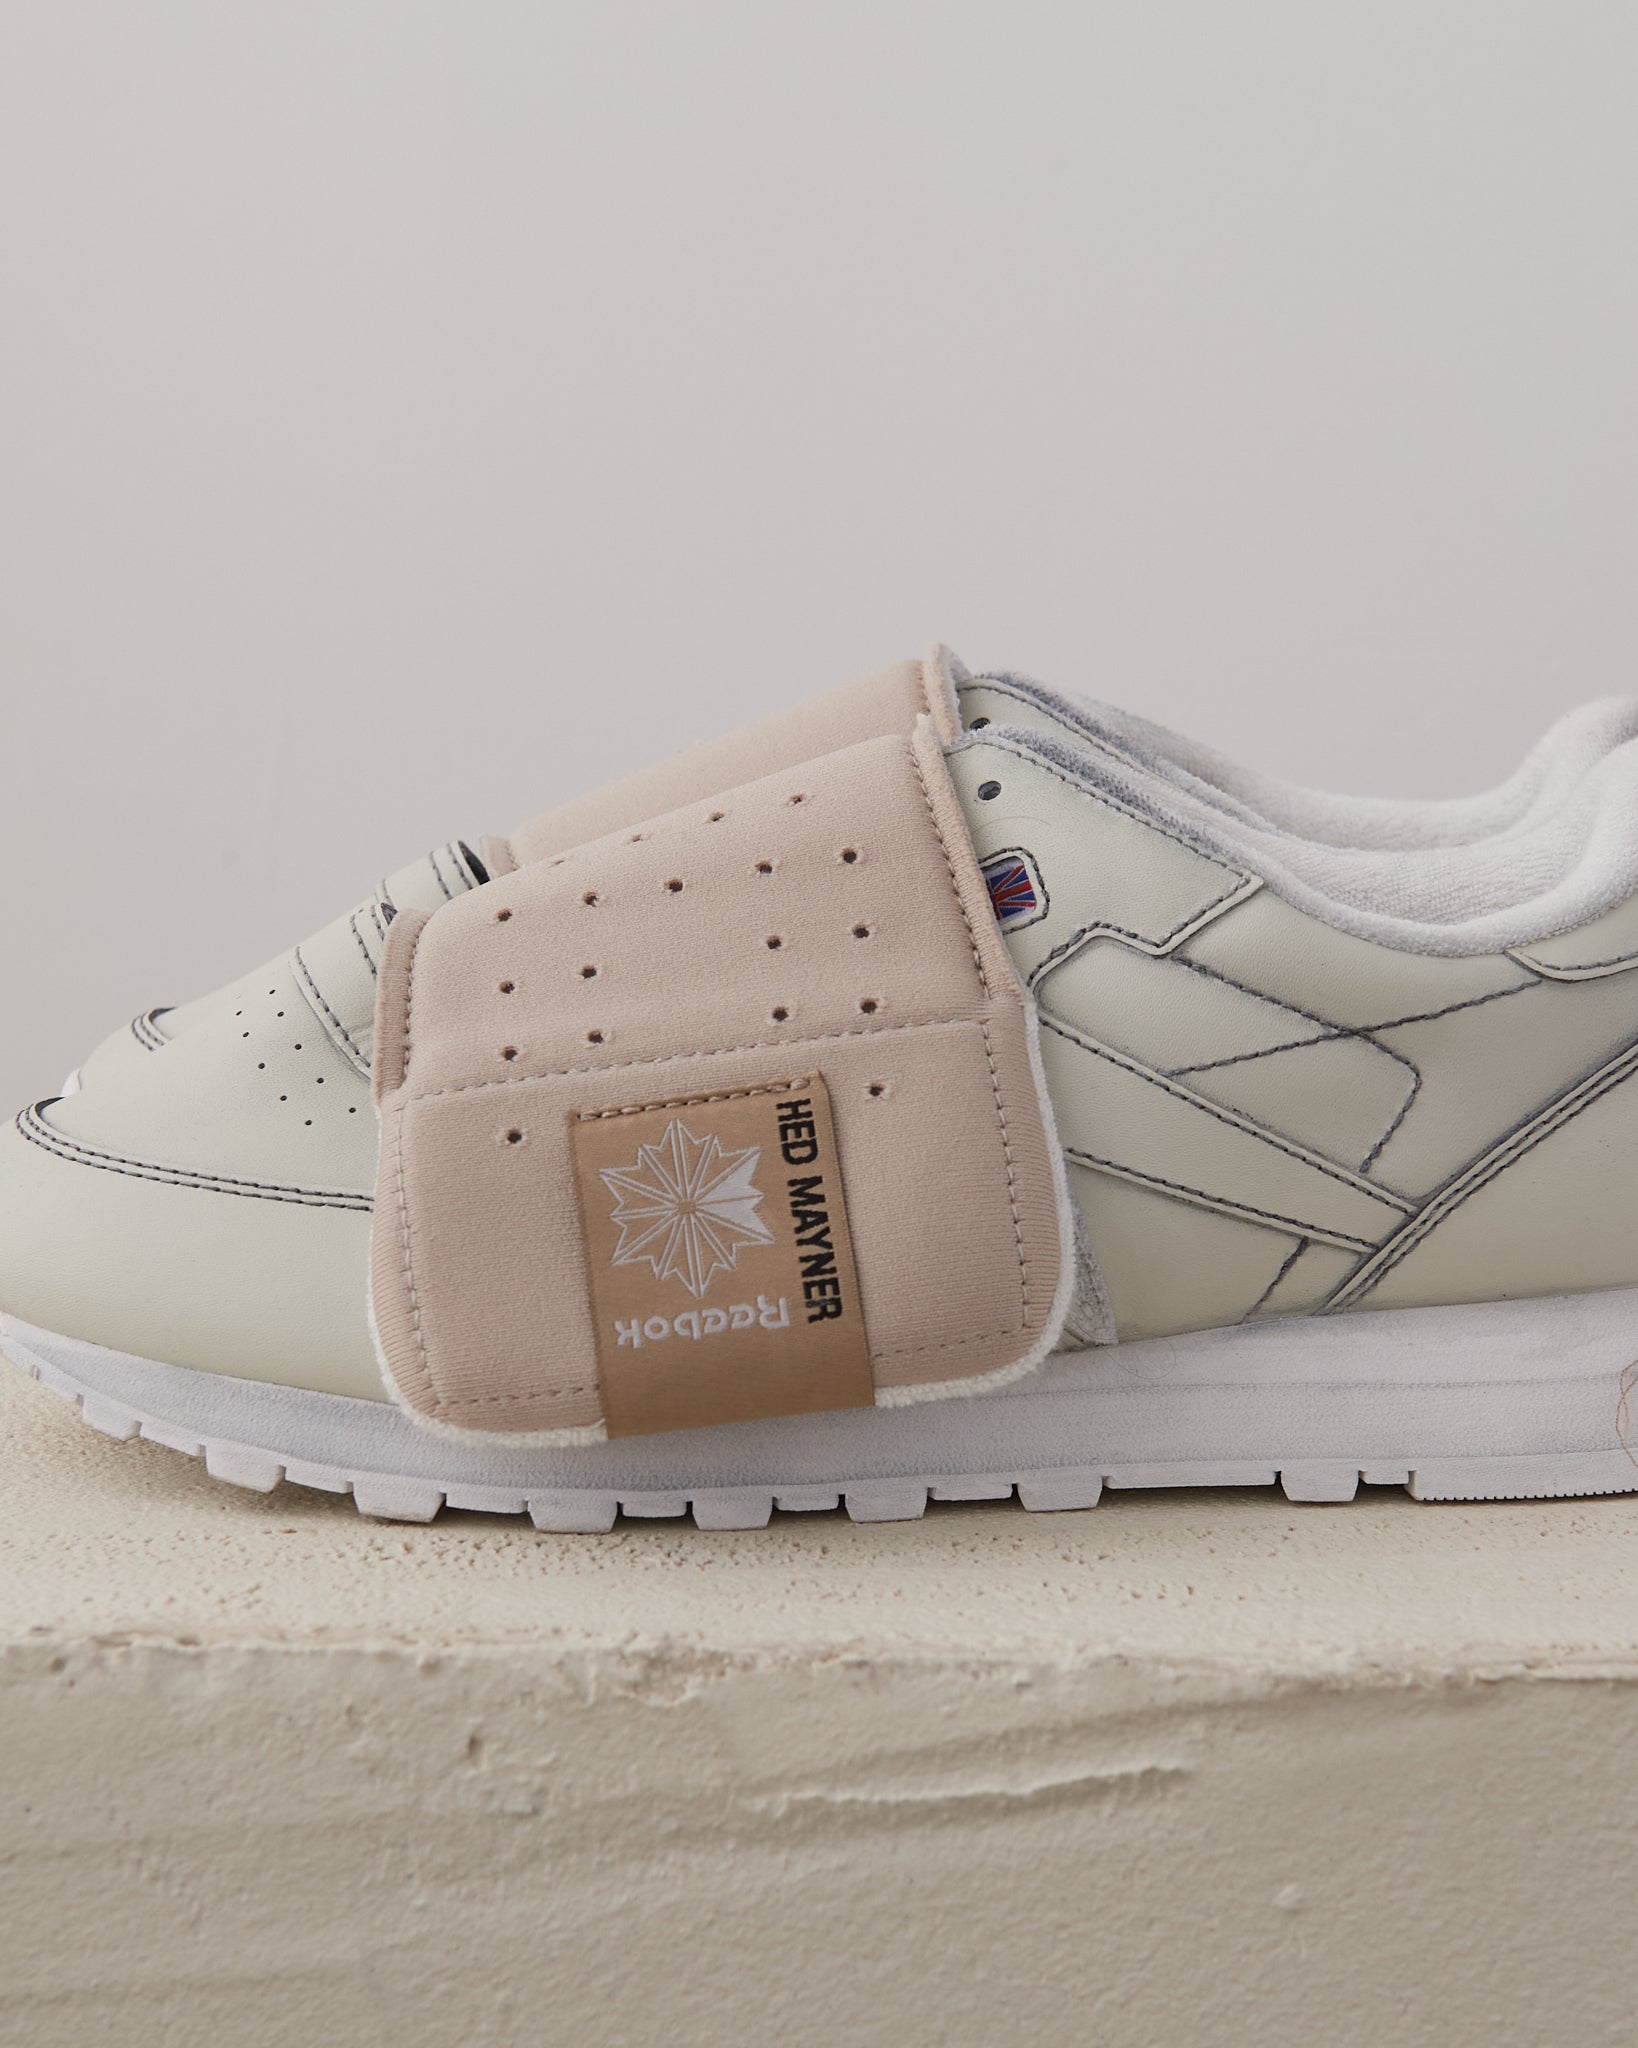 Hed Mayner x Reebok Classic Leather Sneaker, White/Beige